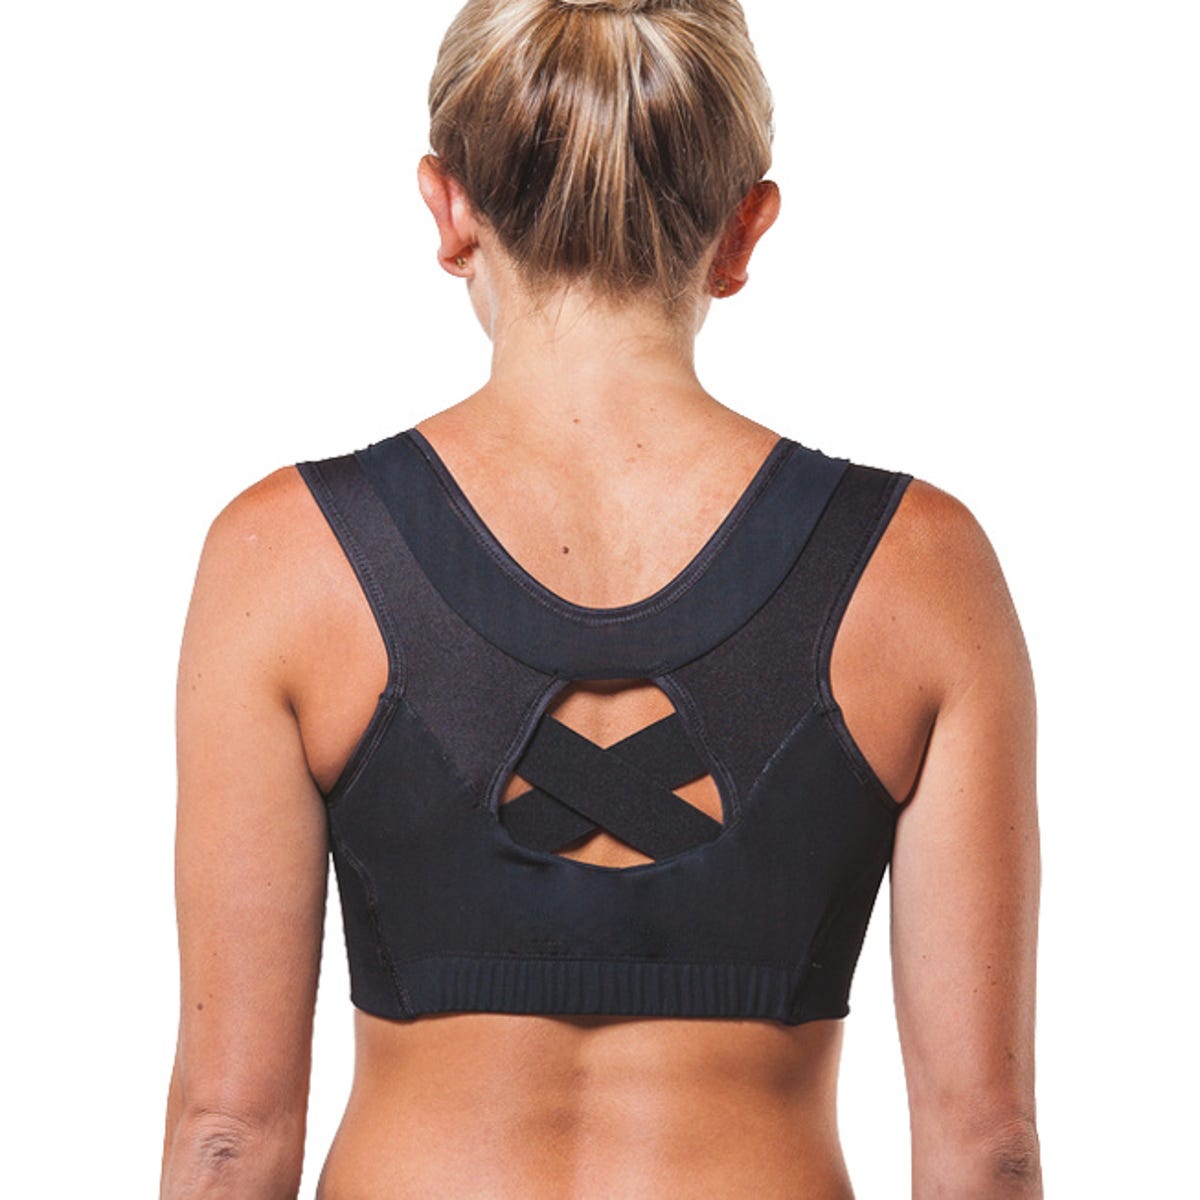 Boobs-on: Interactive sports bra pulls you into alignment - CNET